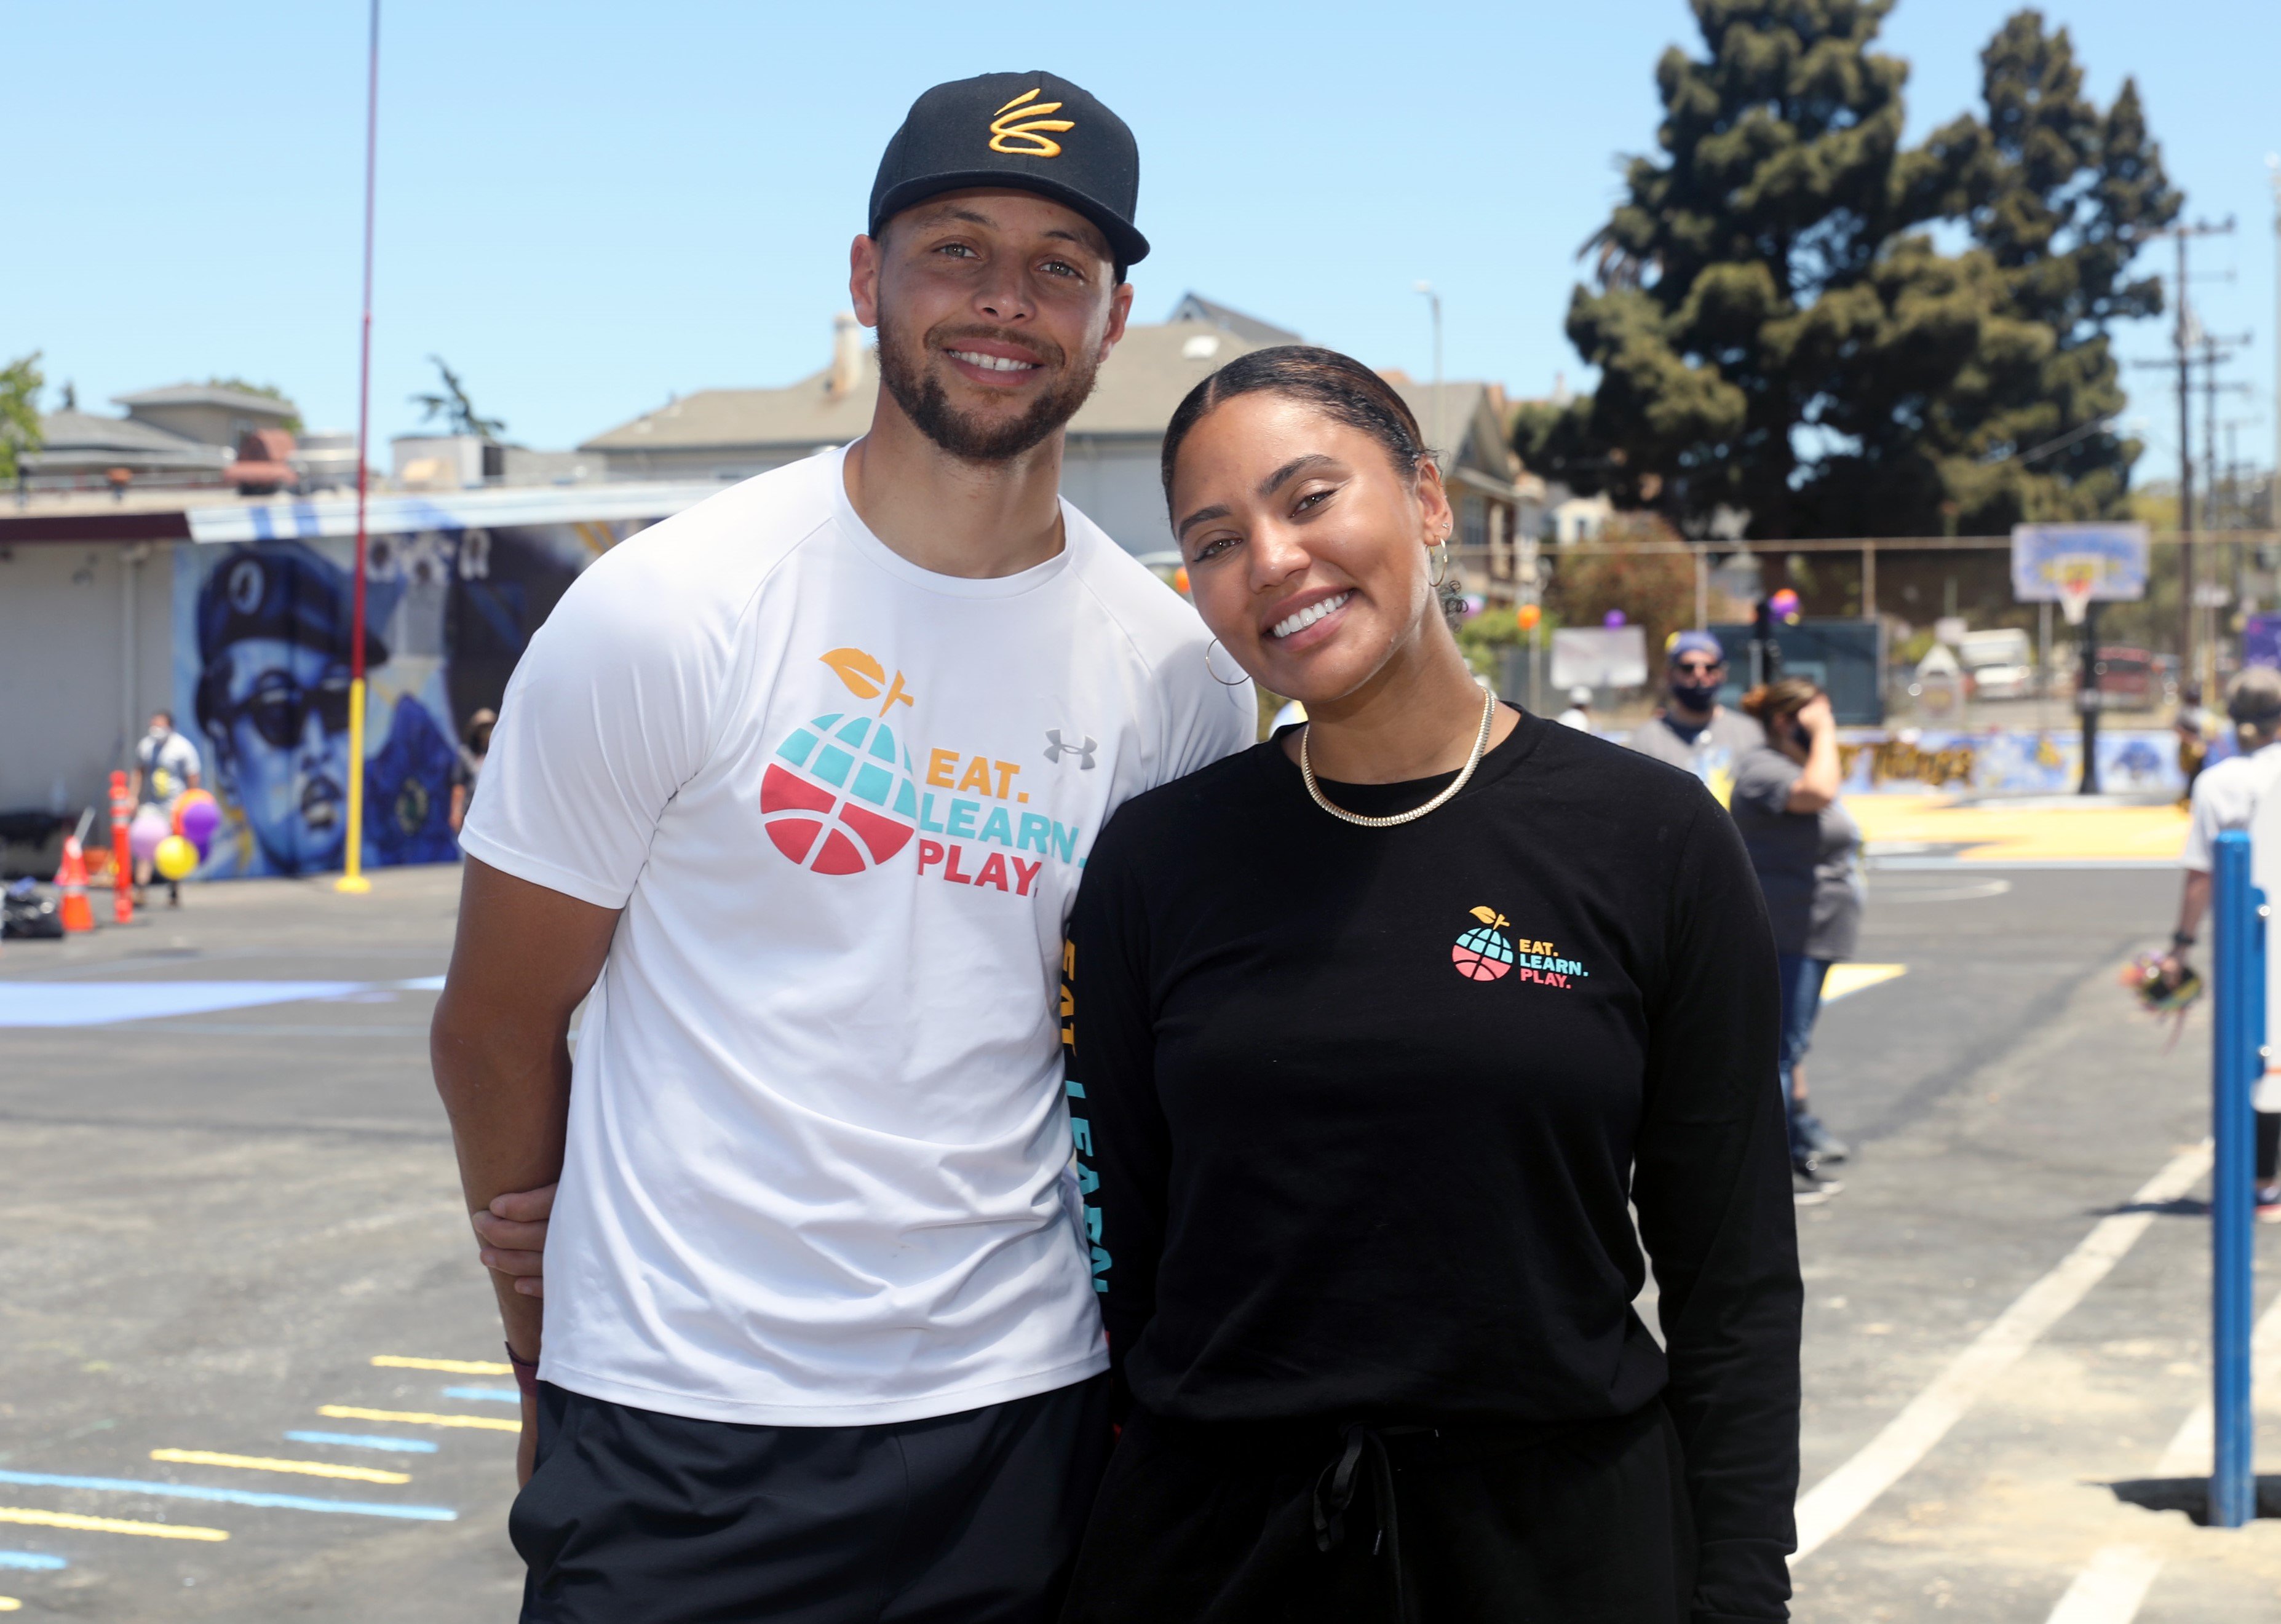 Stephen Curry and Ayesha Curry, who is of mixed ethnicity, attend Eat. Learn. Play. event in Oakland, California